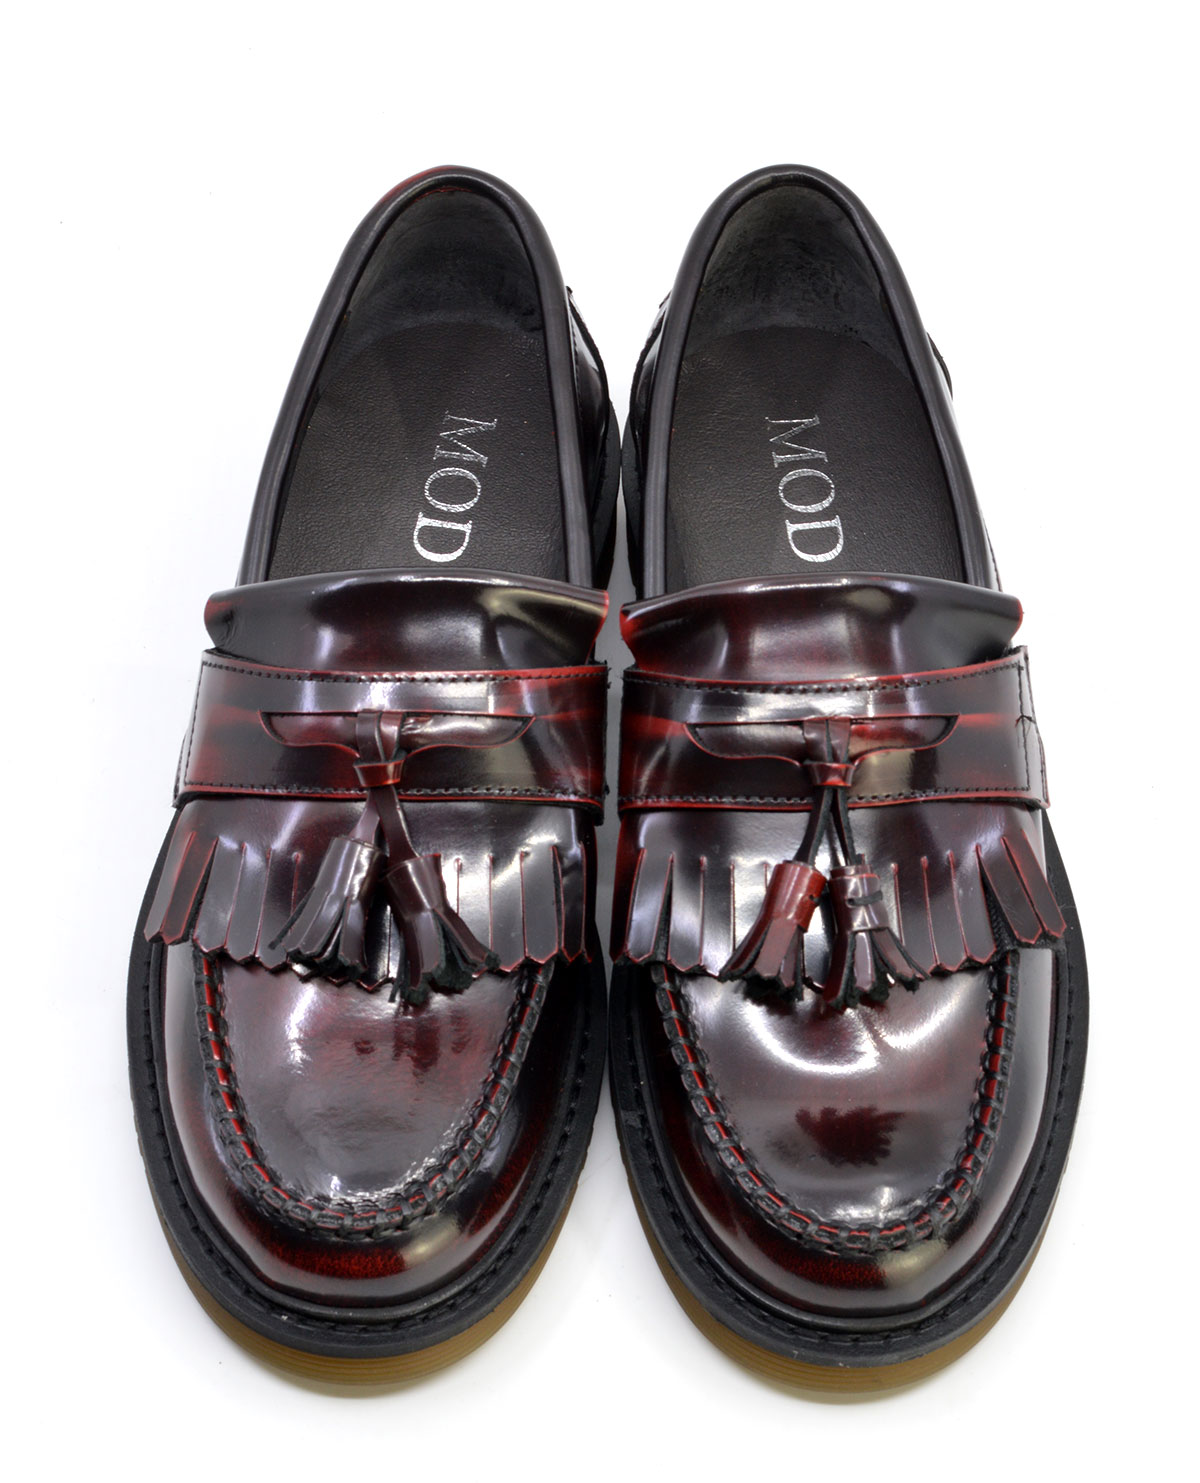 The Prince ‘Air Cushion’ Soles Oxblood Loafers – Mod Ska Northern Soul ...